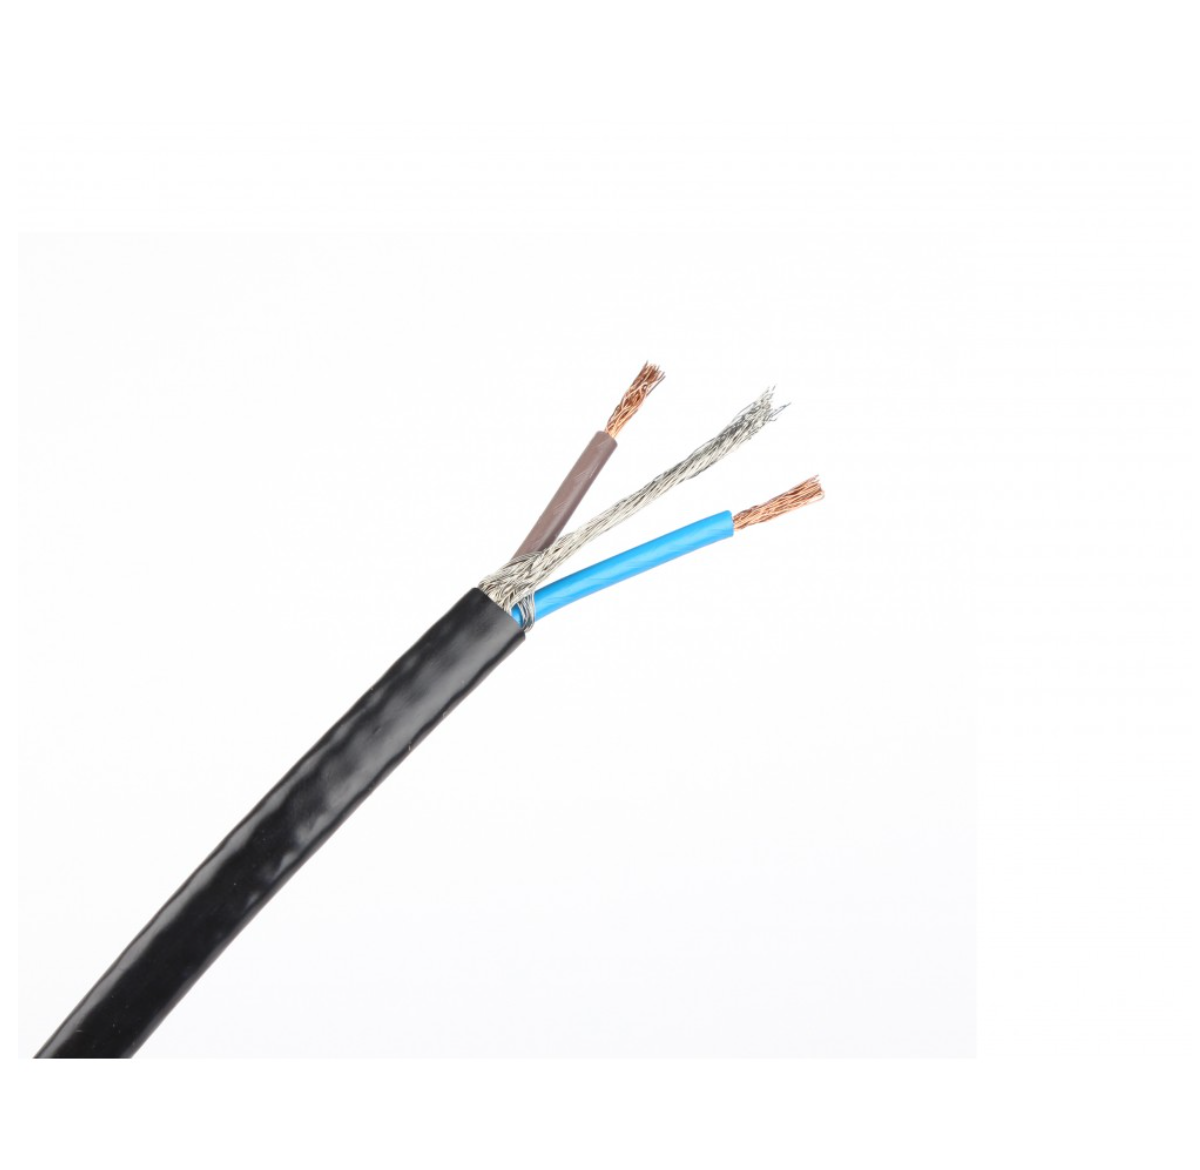 Heating cable - 140m